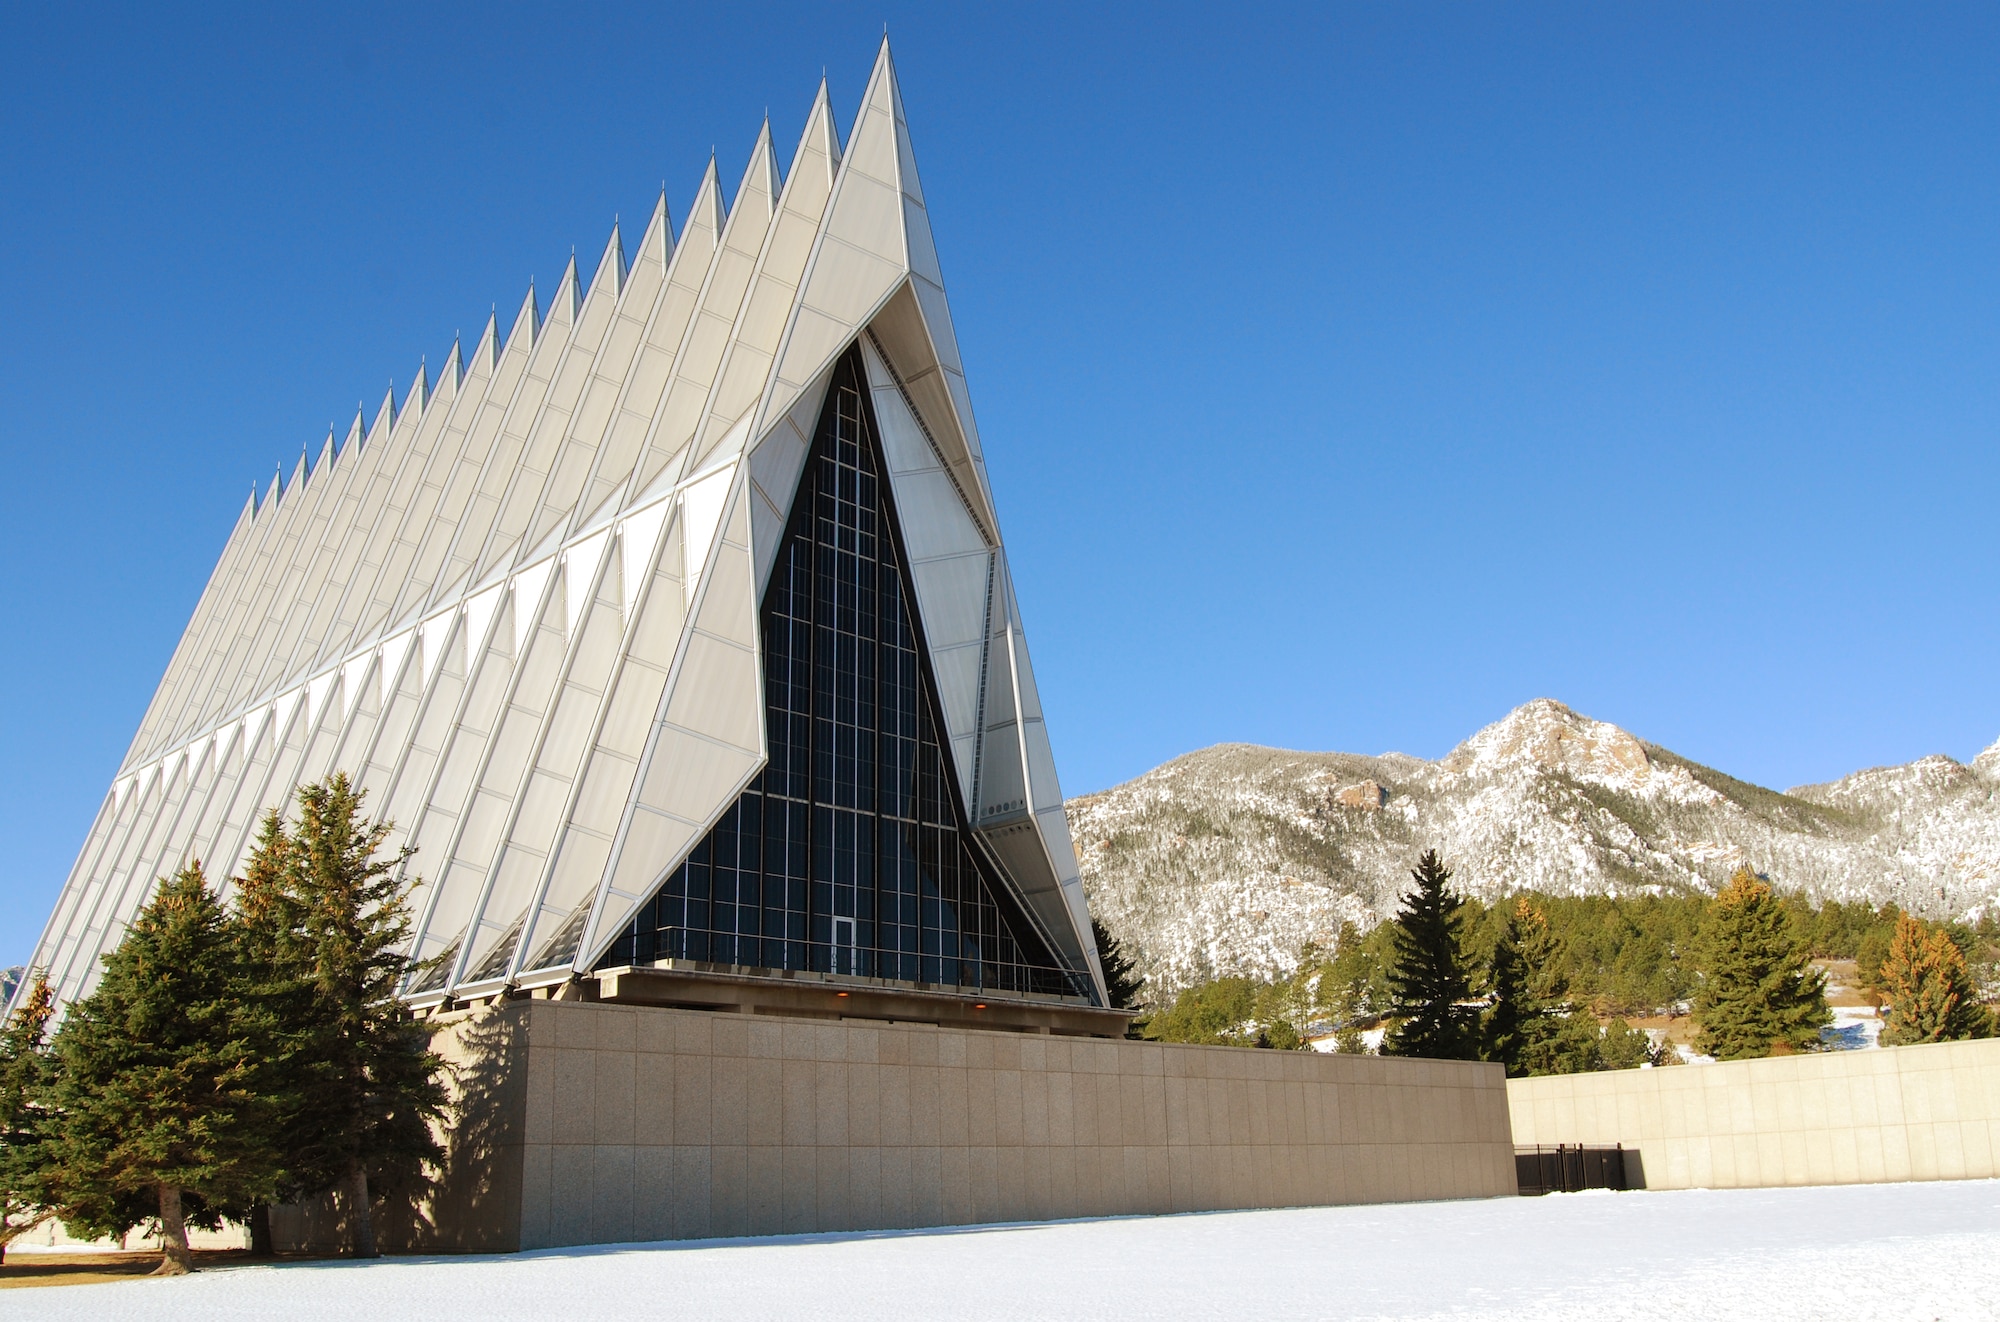 The Air Force Academy Cadet Chapel